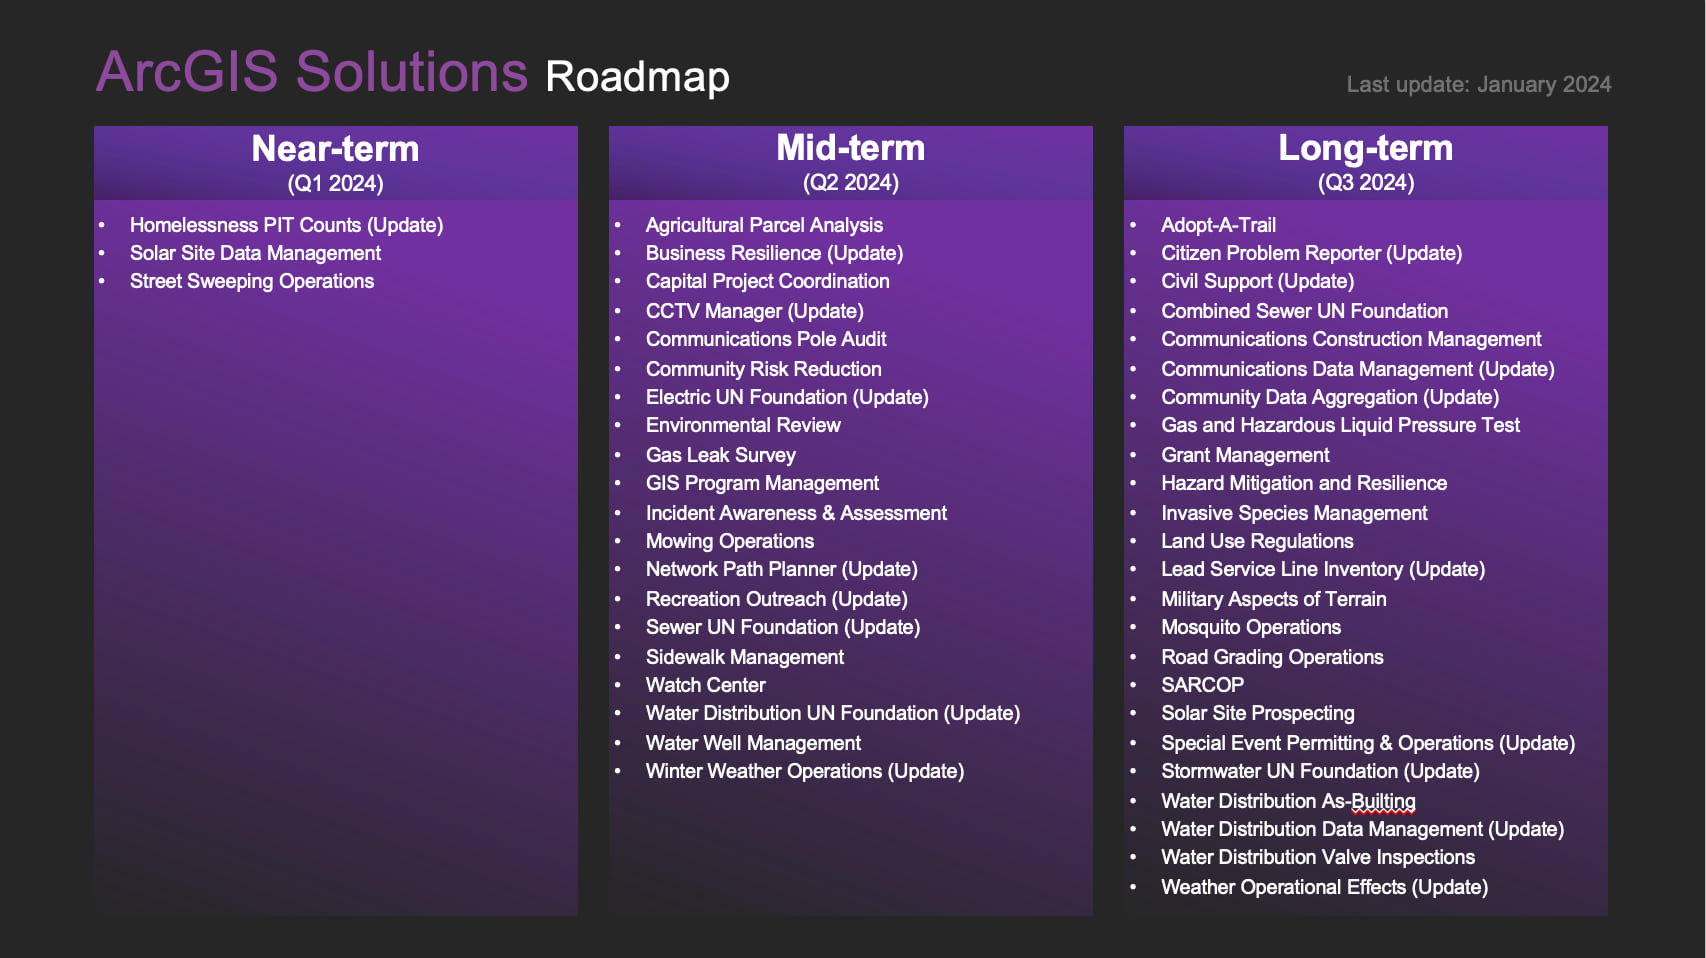 ArcGIS Solutions January 2024 Roadmap with a list of planned solutions.